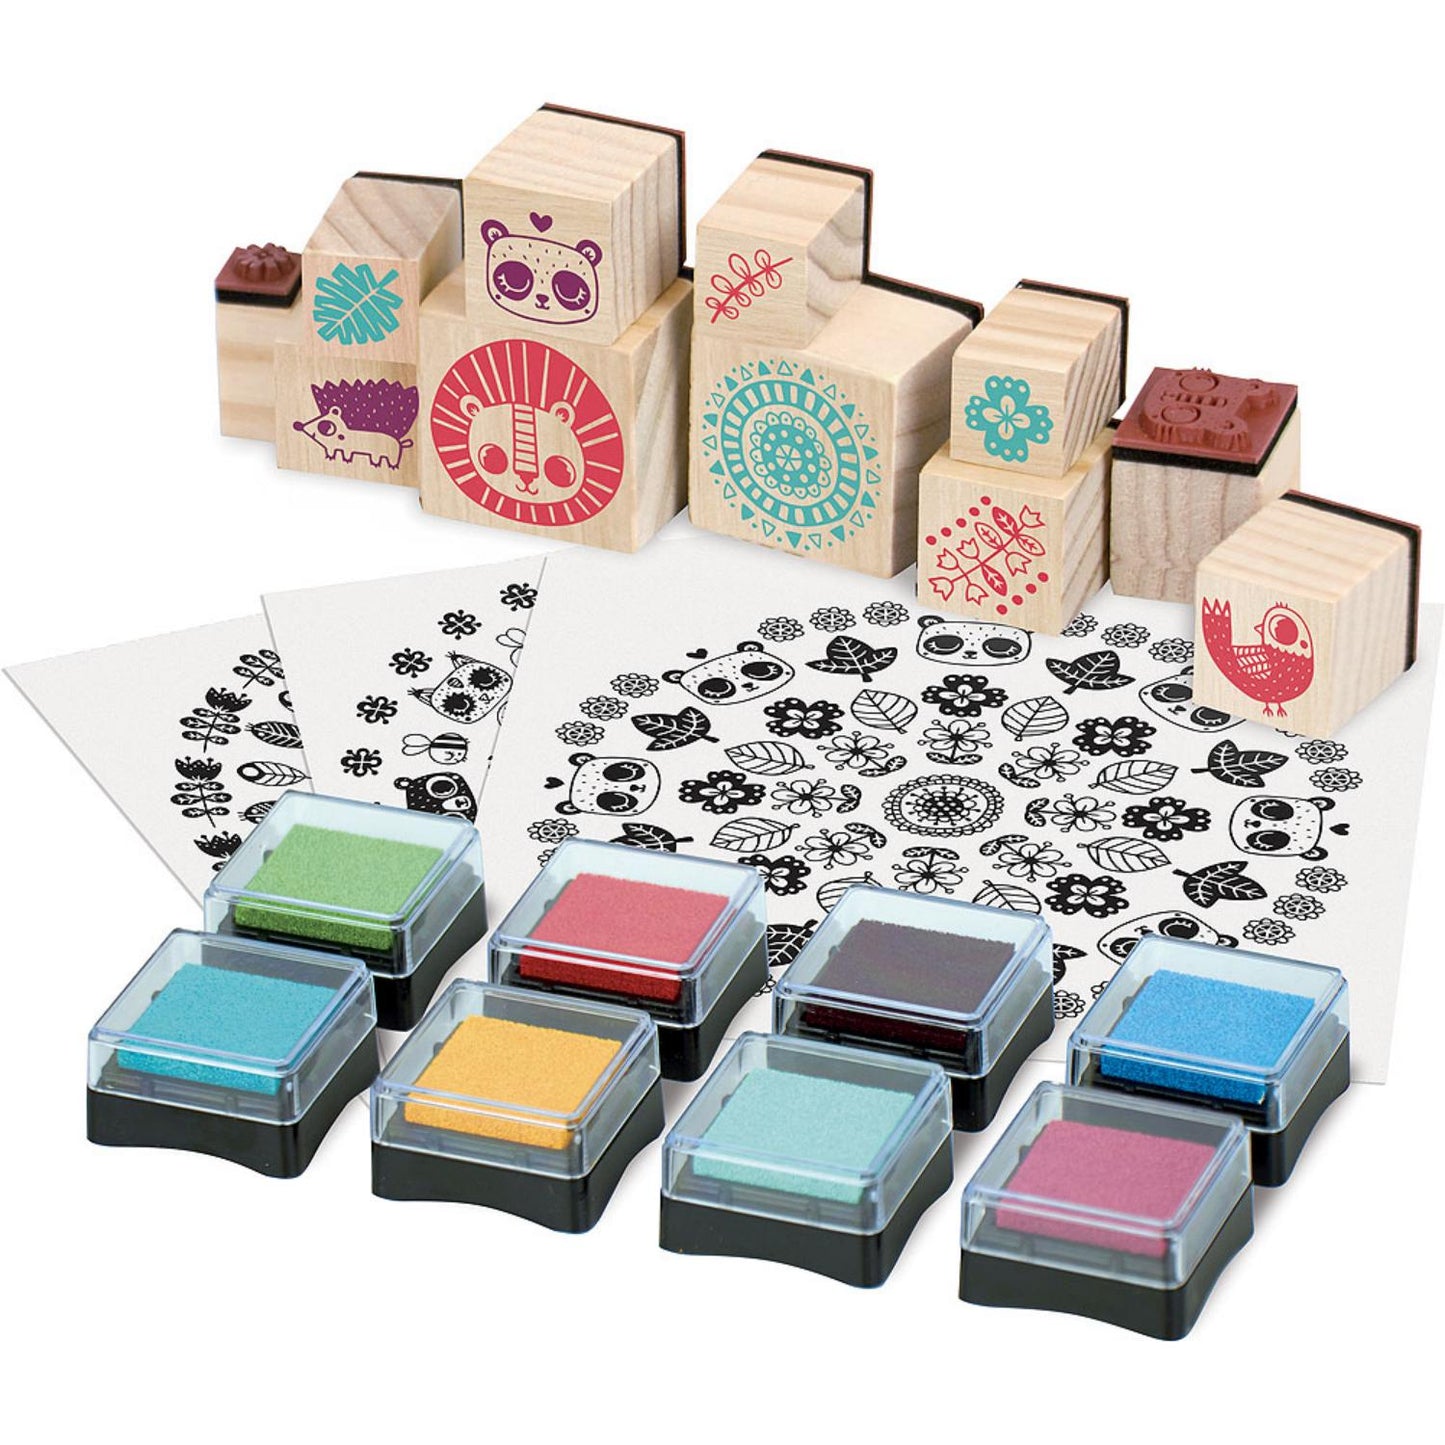 Vilac Mandala Wooden Rubber Stamp Set | Creativity Stamp Set for Kids | Front View – Selection of Stamps and Ink Pads | BeoVERDE Ireland